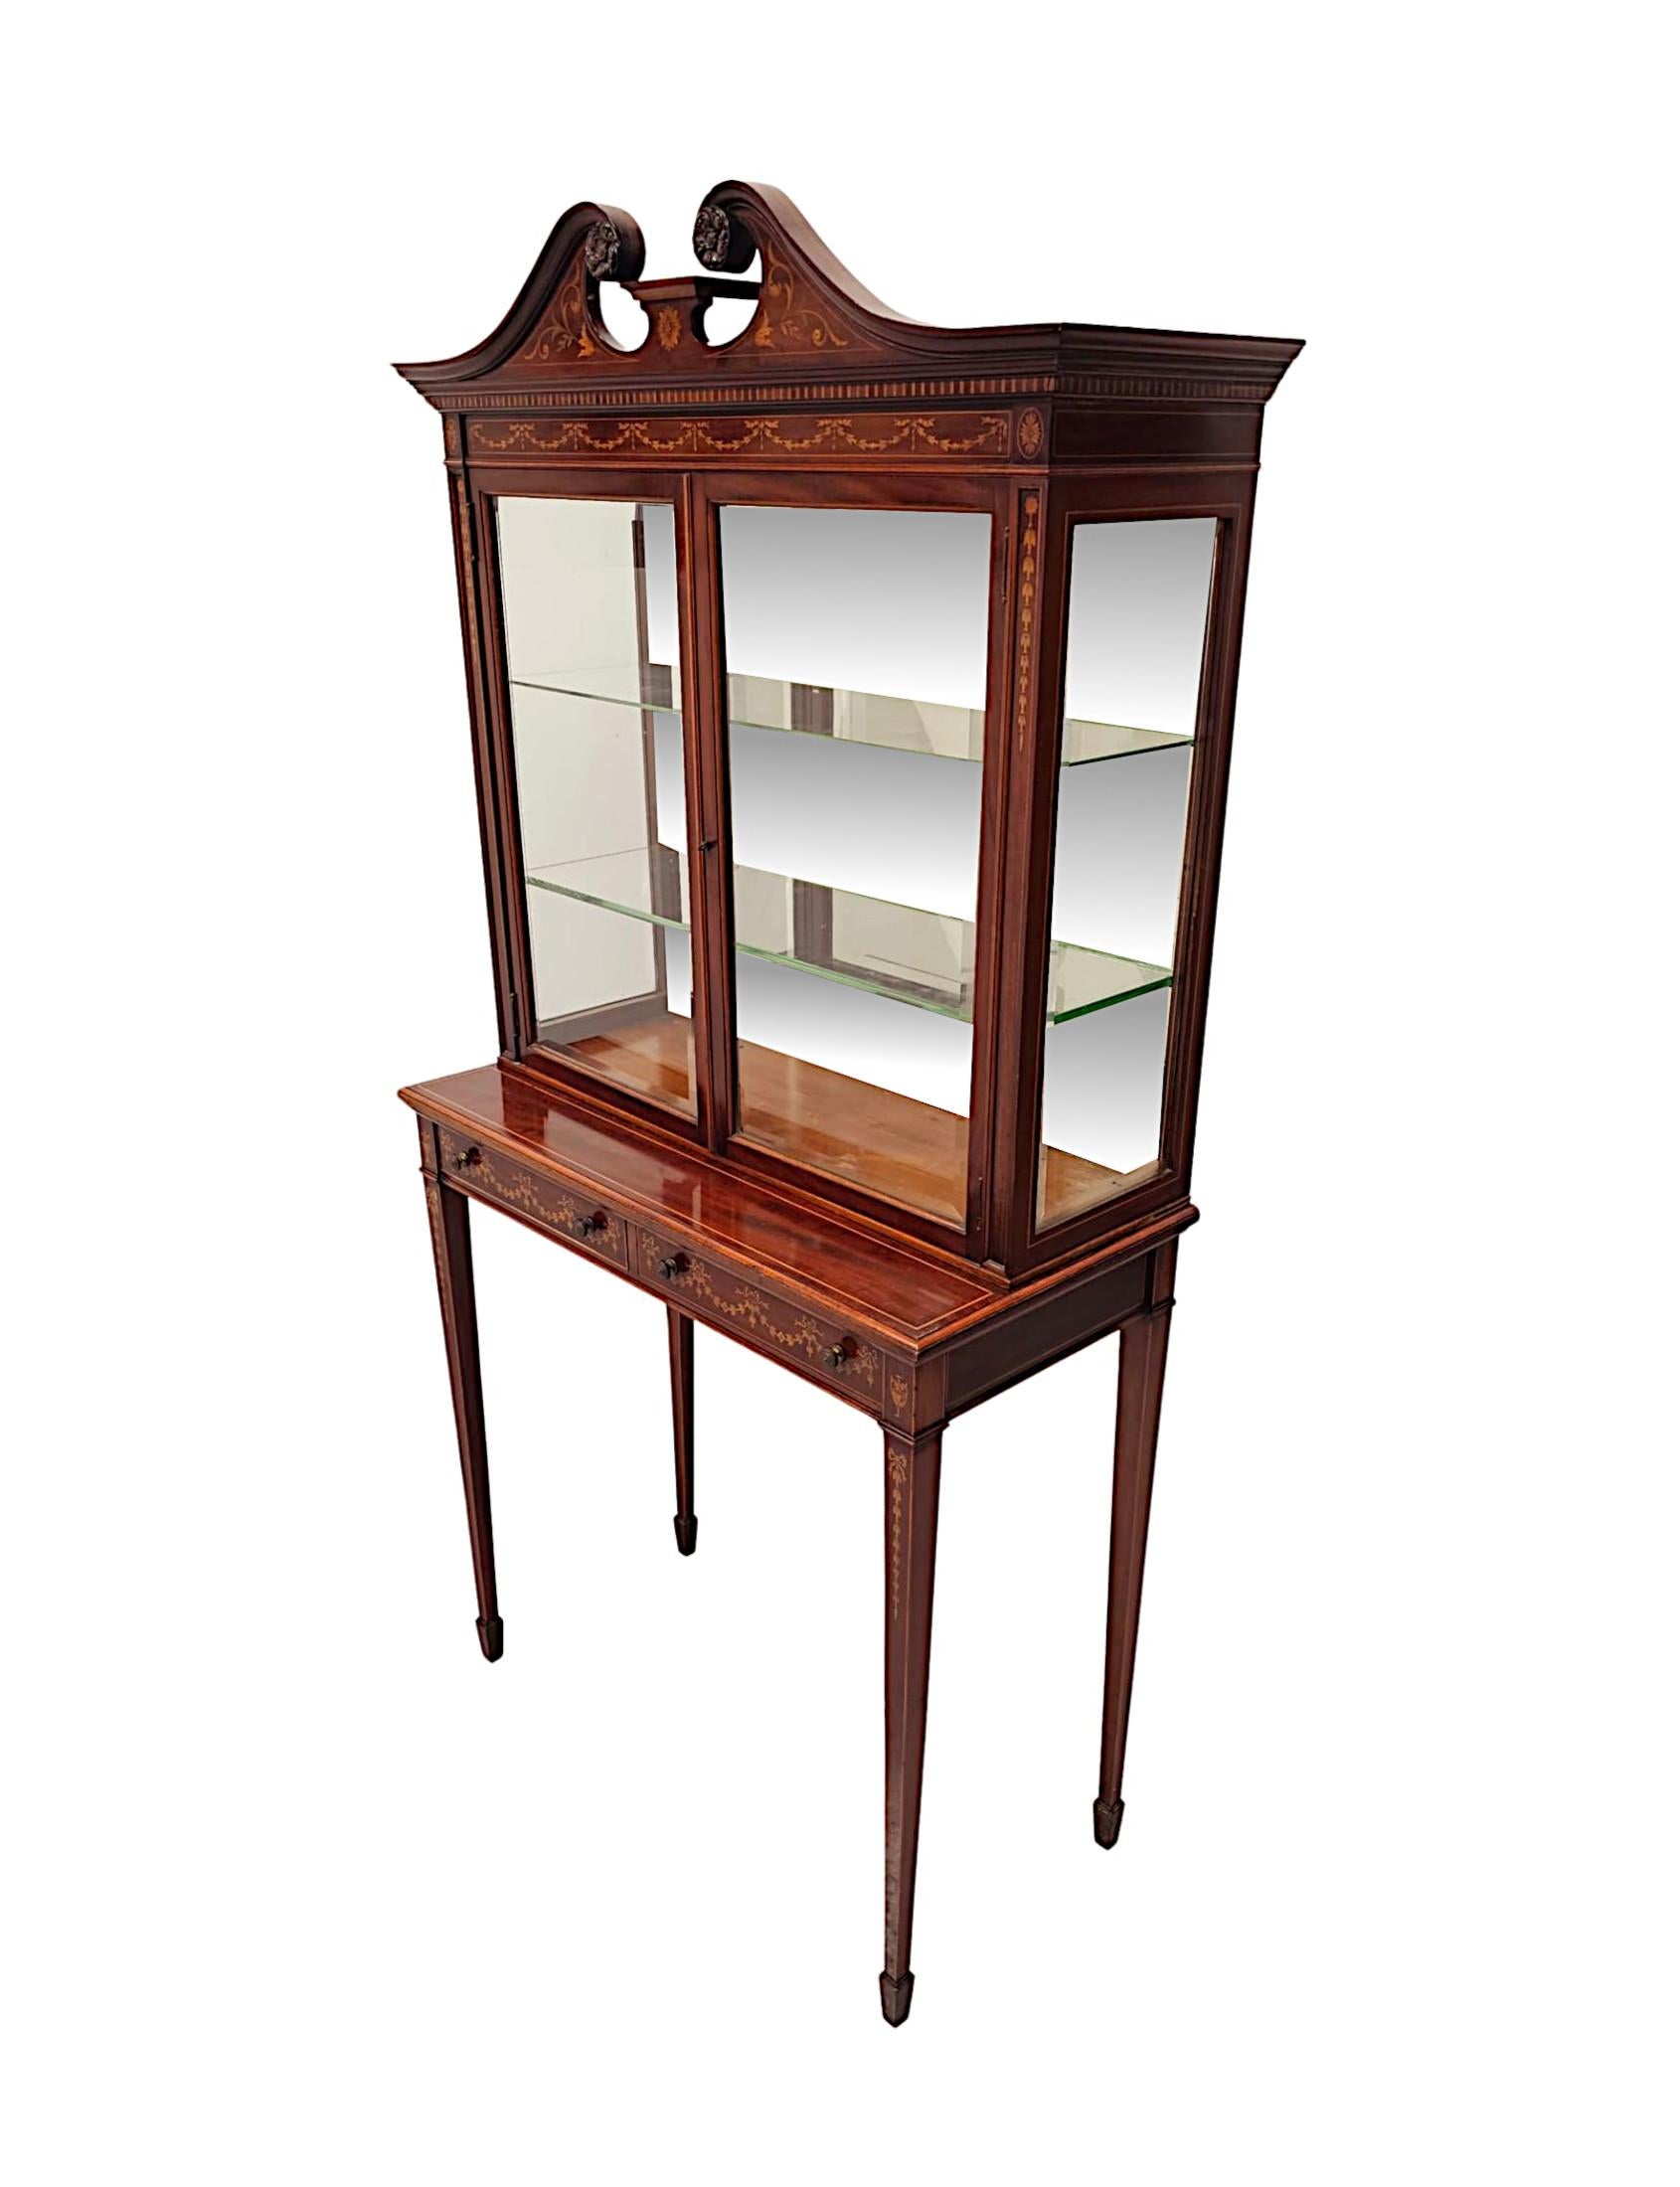 An extremely rare pair of finely figured, mahogany pier cabinets or bookcases in the manner of Edwards and Roberts.  This exceptional pair are finely carved with gorgeously rich patination and feature crossbanded panels, delicate line inlay and